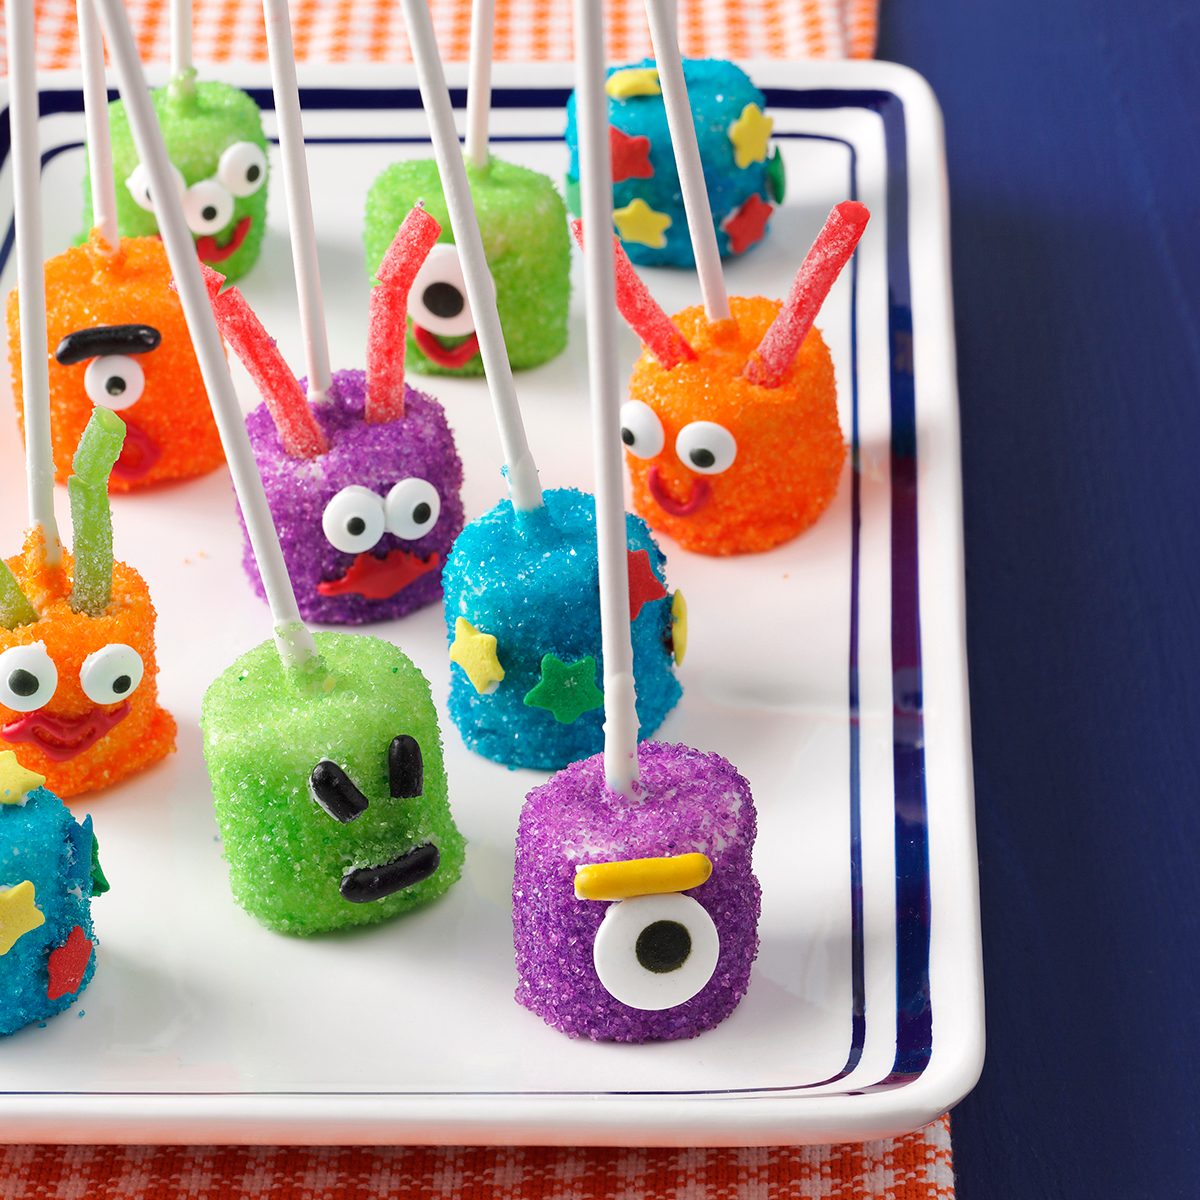 Marshmallows attached to lollipop sticks decorated as martians arranged on a plate.